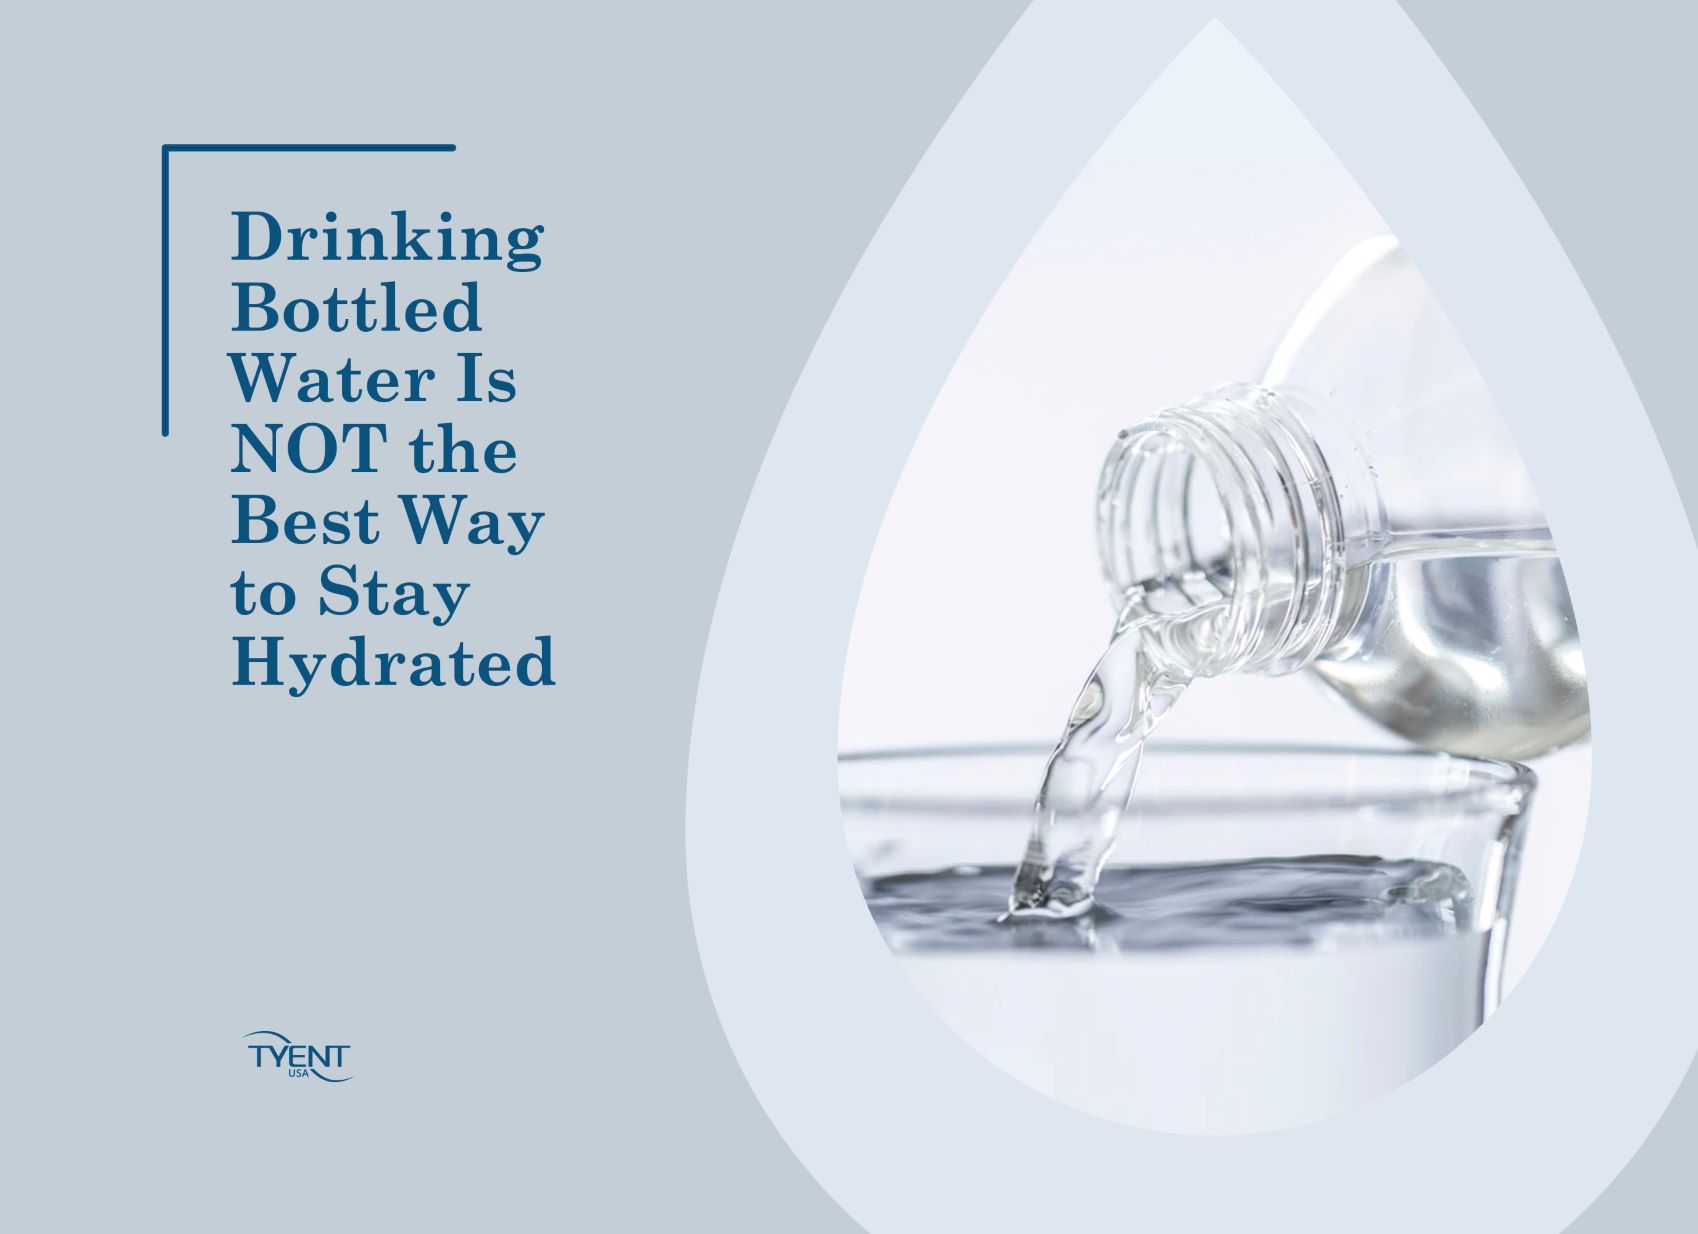 Drinking Bottled Water Is NOT the Best Way